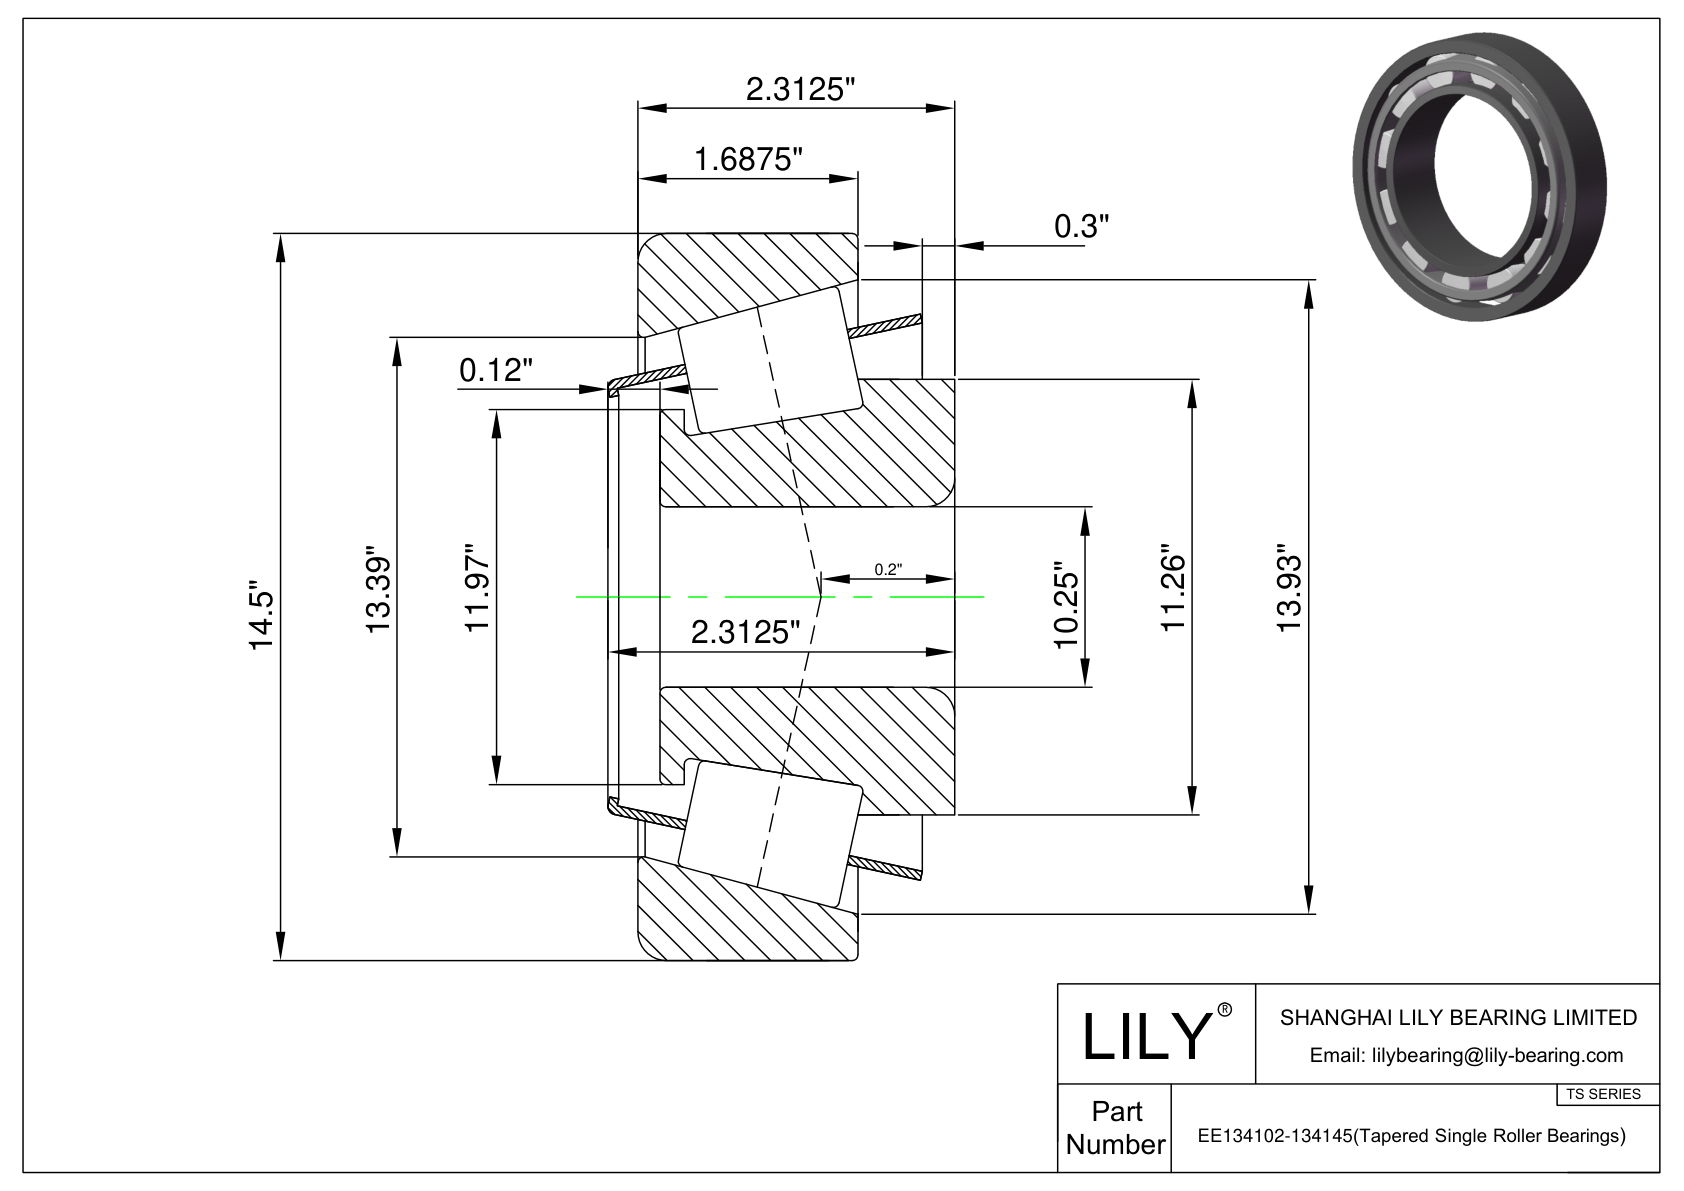 EE134102-134145 TS (Tapered Single Roller Bearings) (Imperial) cad drawing